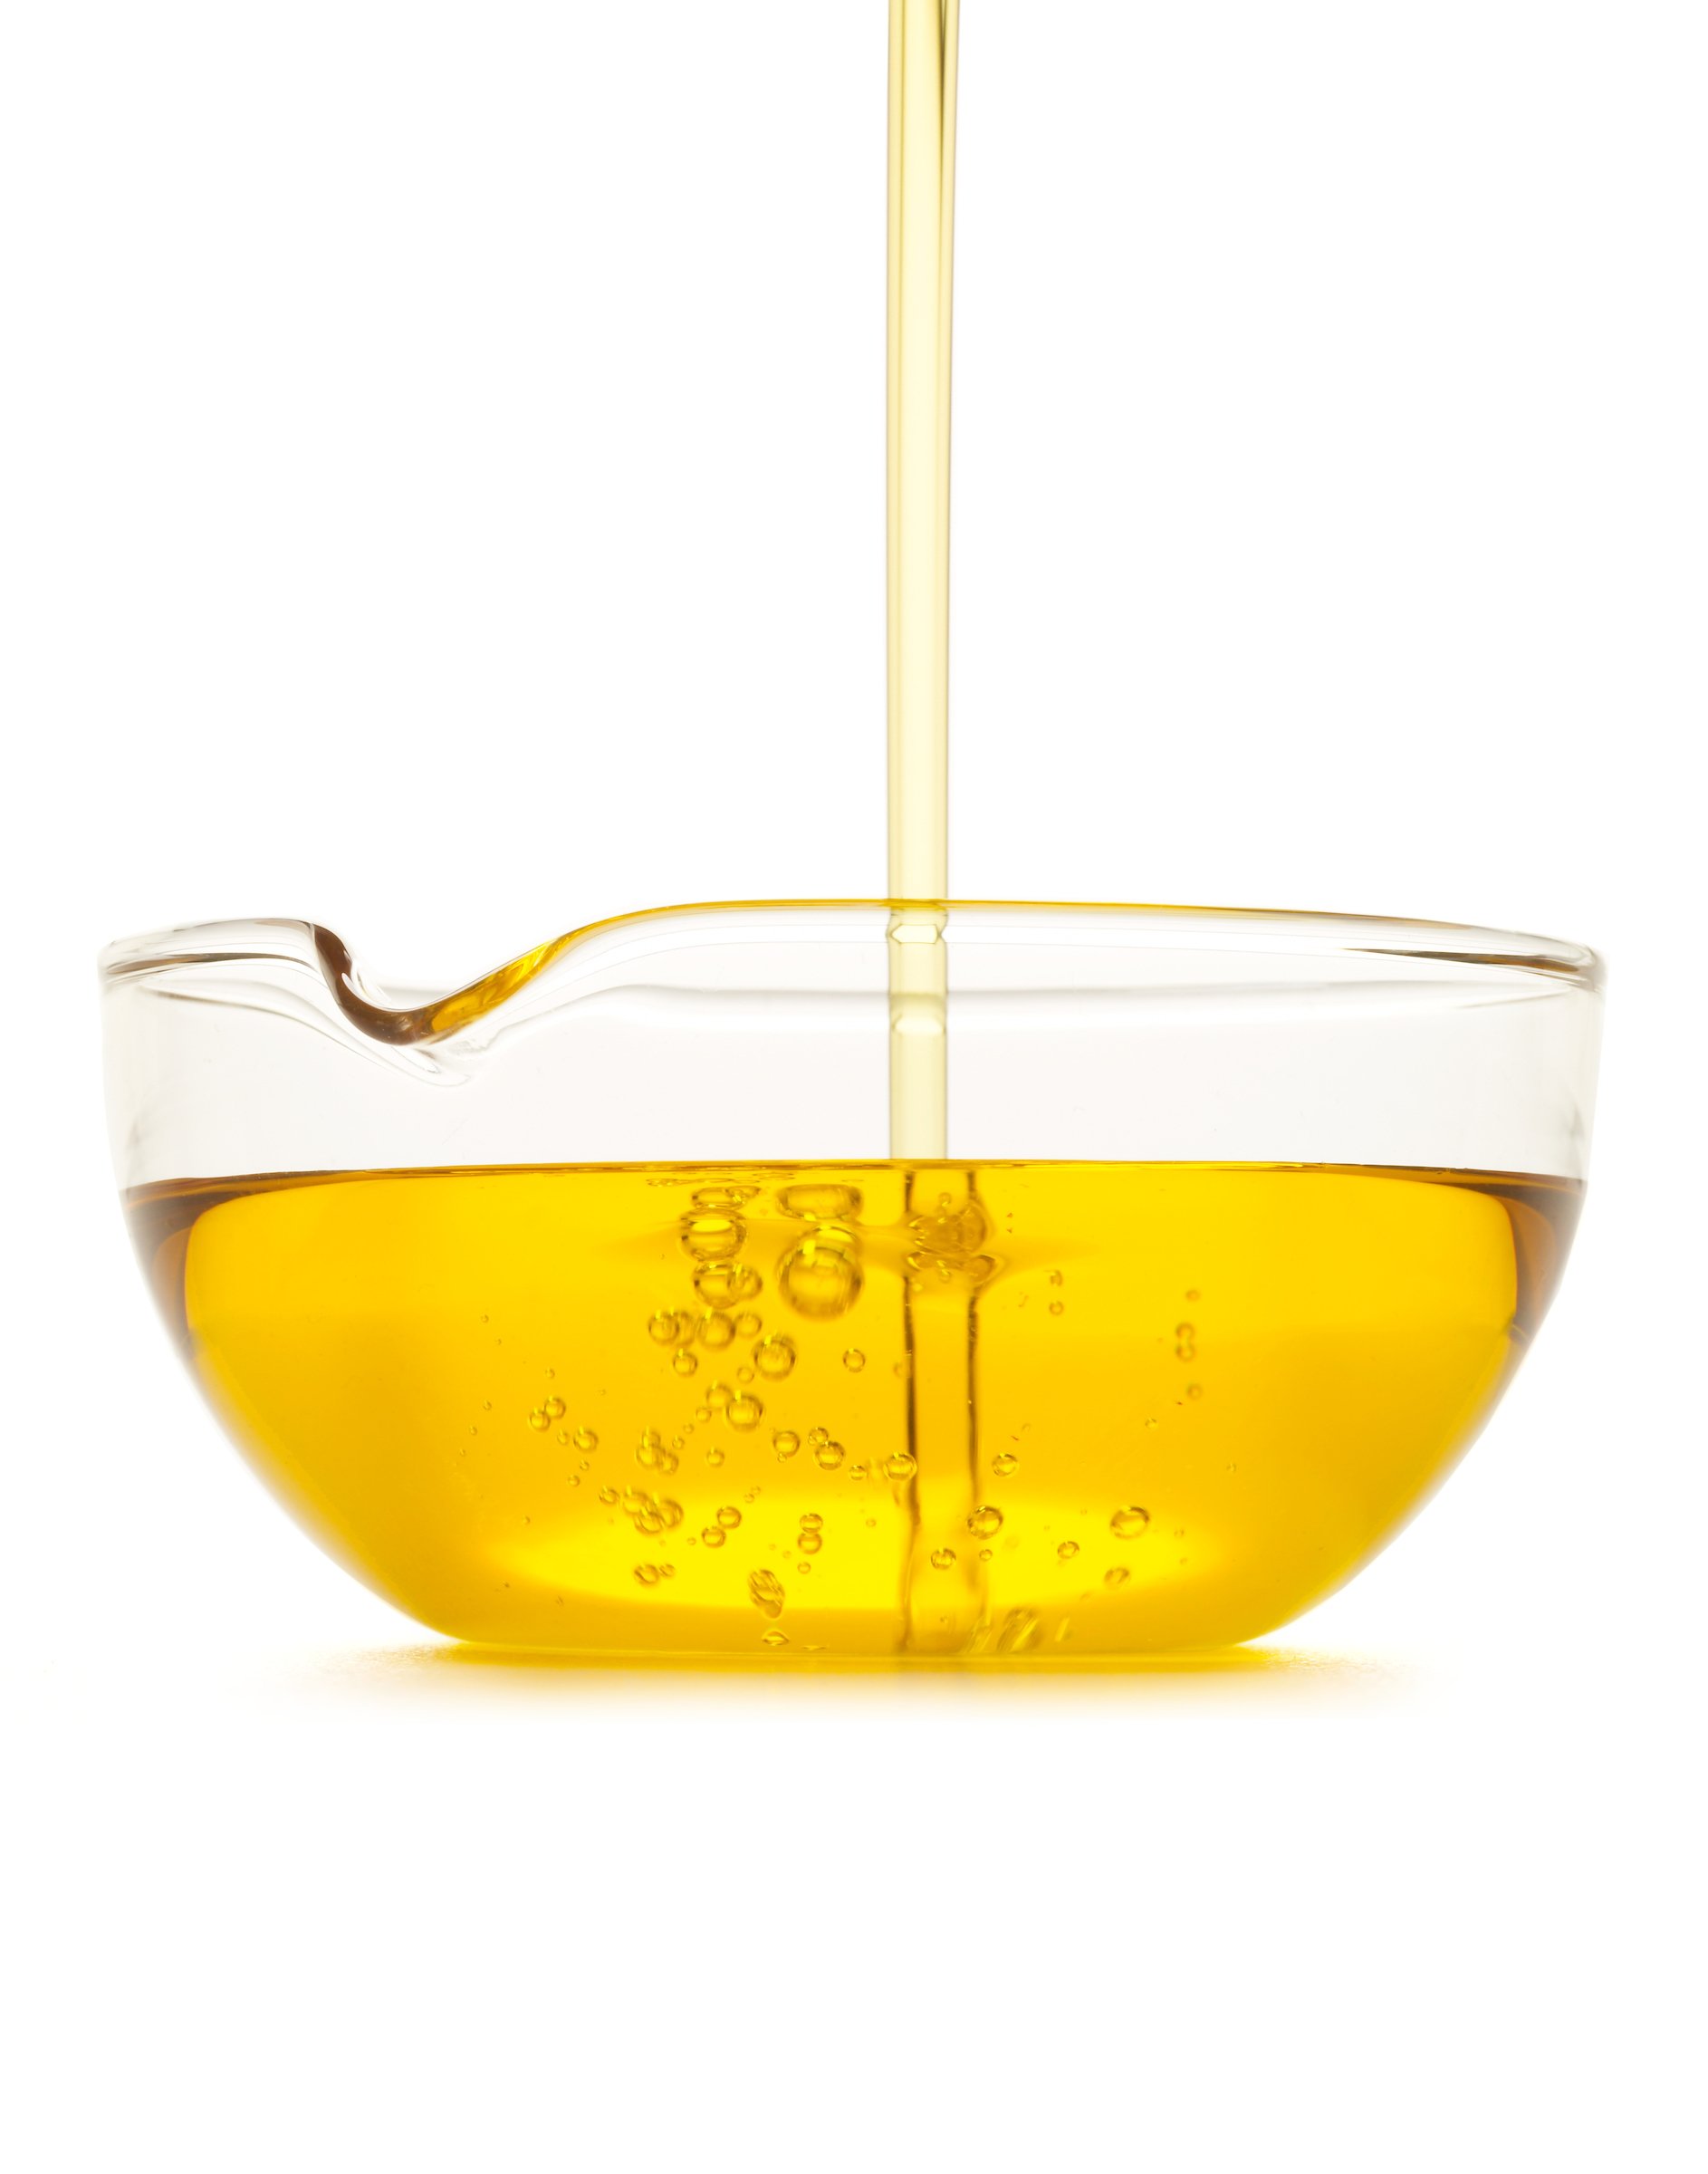 Oil pouring into glass bowl.jpg